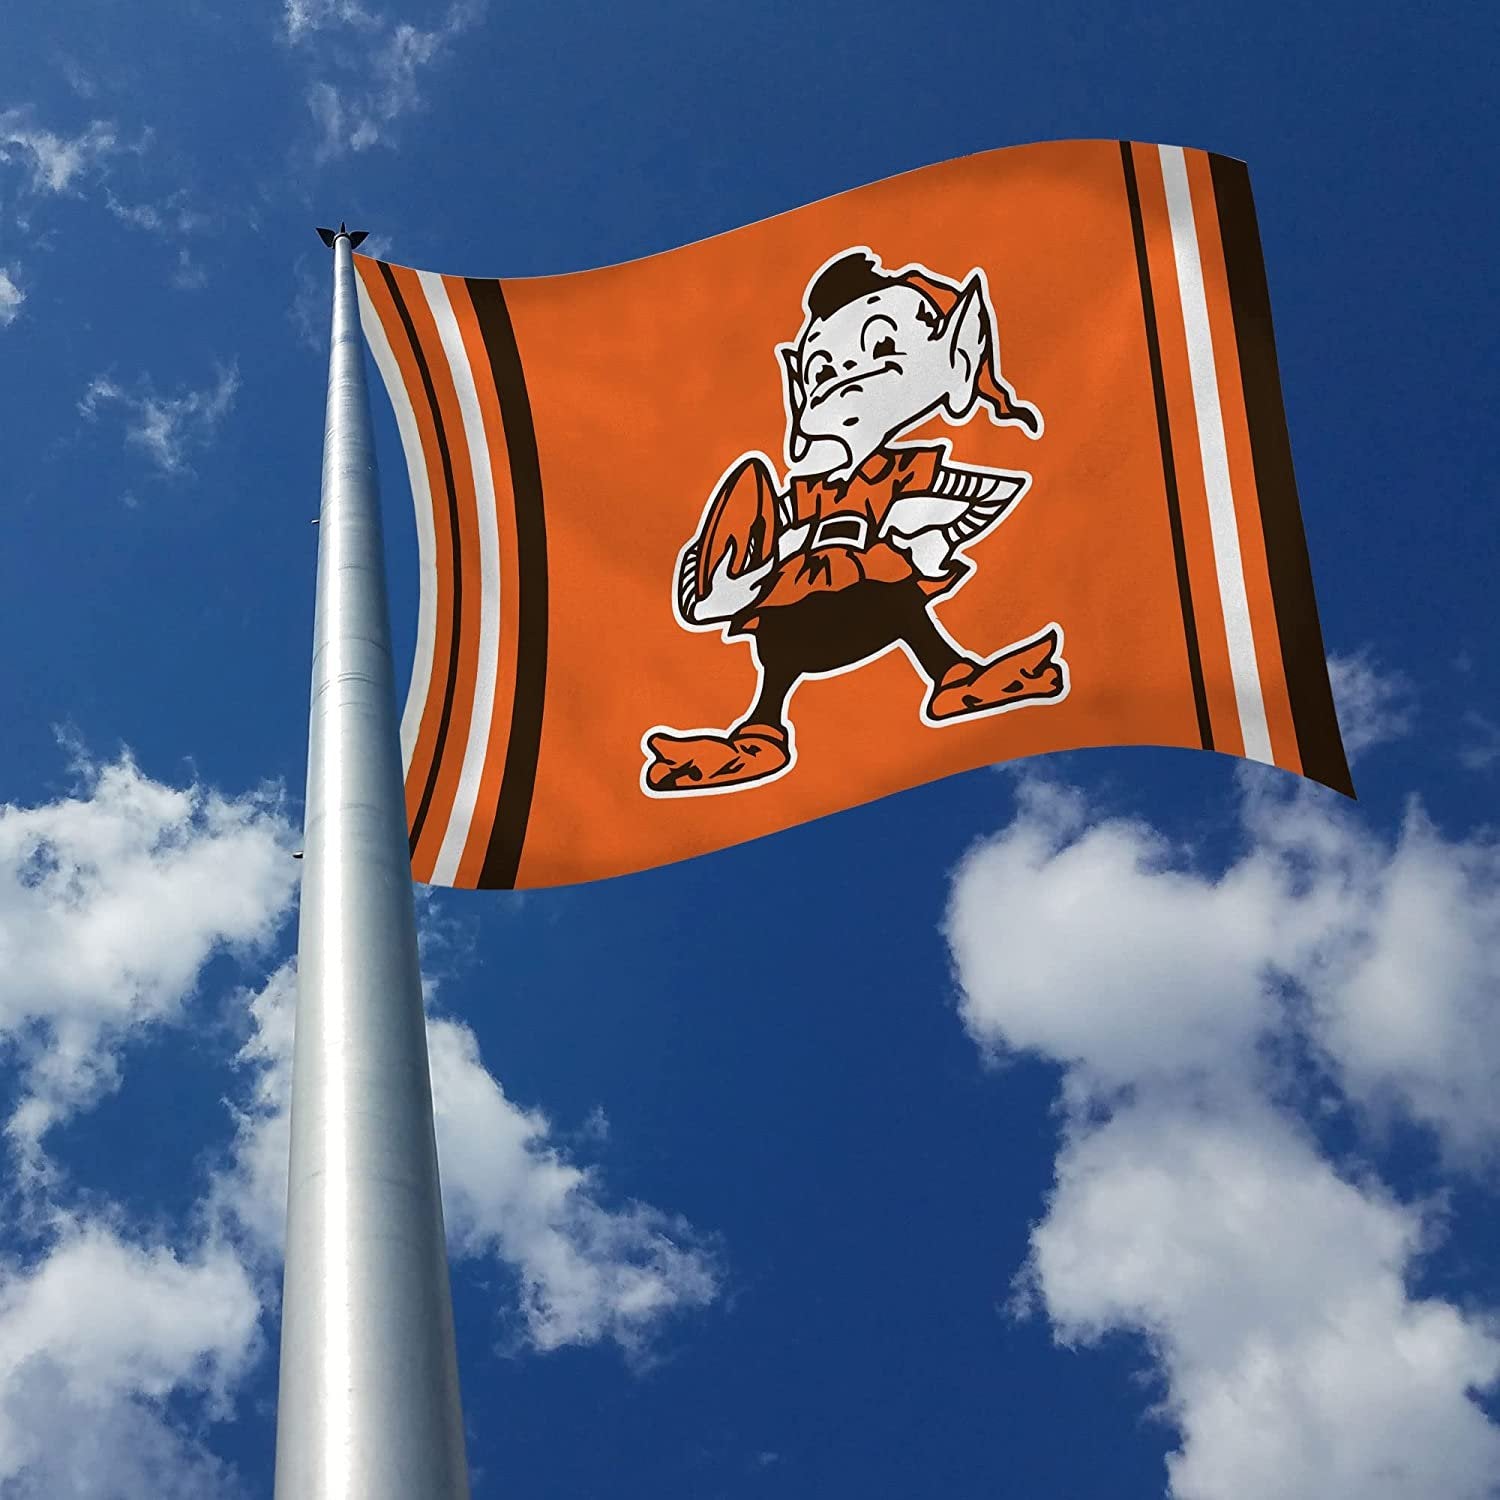 Cleveland Browns Premium 3x5 Feet Flag Banner, Retro Logo, Metal Grommets, Single Sided, Outdoor or Indoor Use